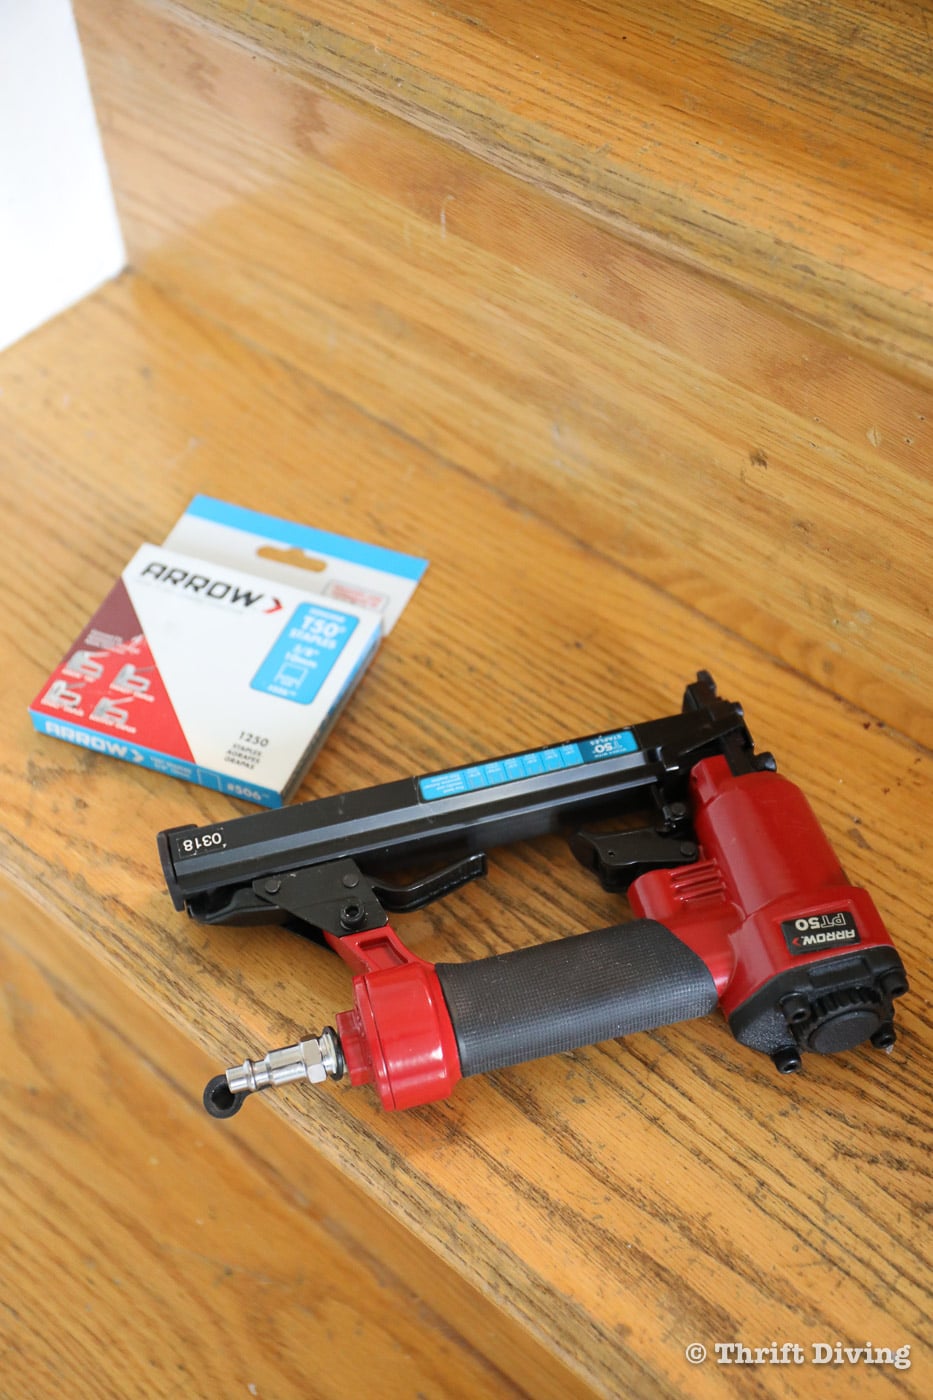 Use an Arrow Fastener PT50 pneumatic stapler for installing a stair runner, with 3/8" or 1/2" staples - Thrift Diving